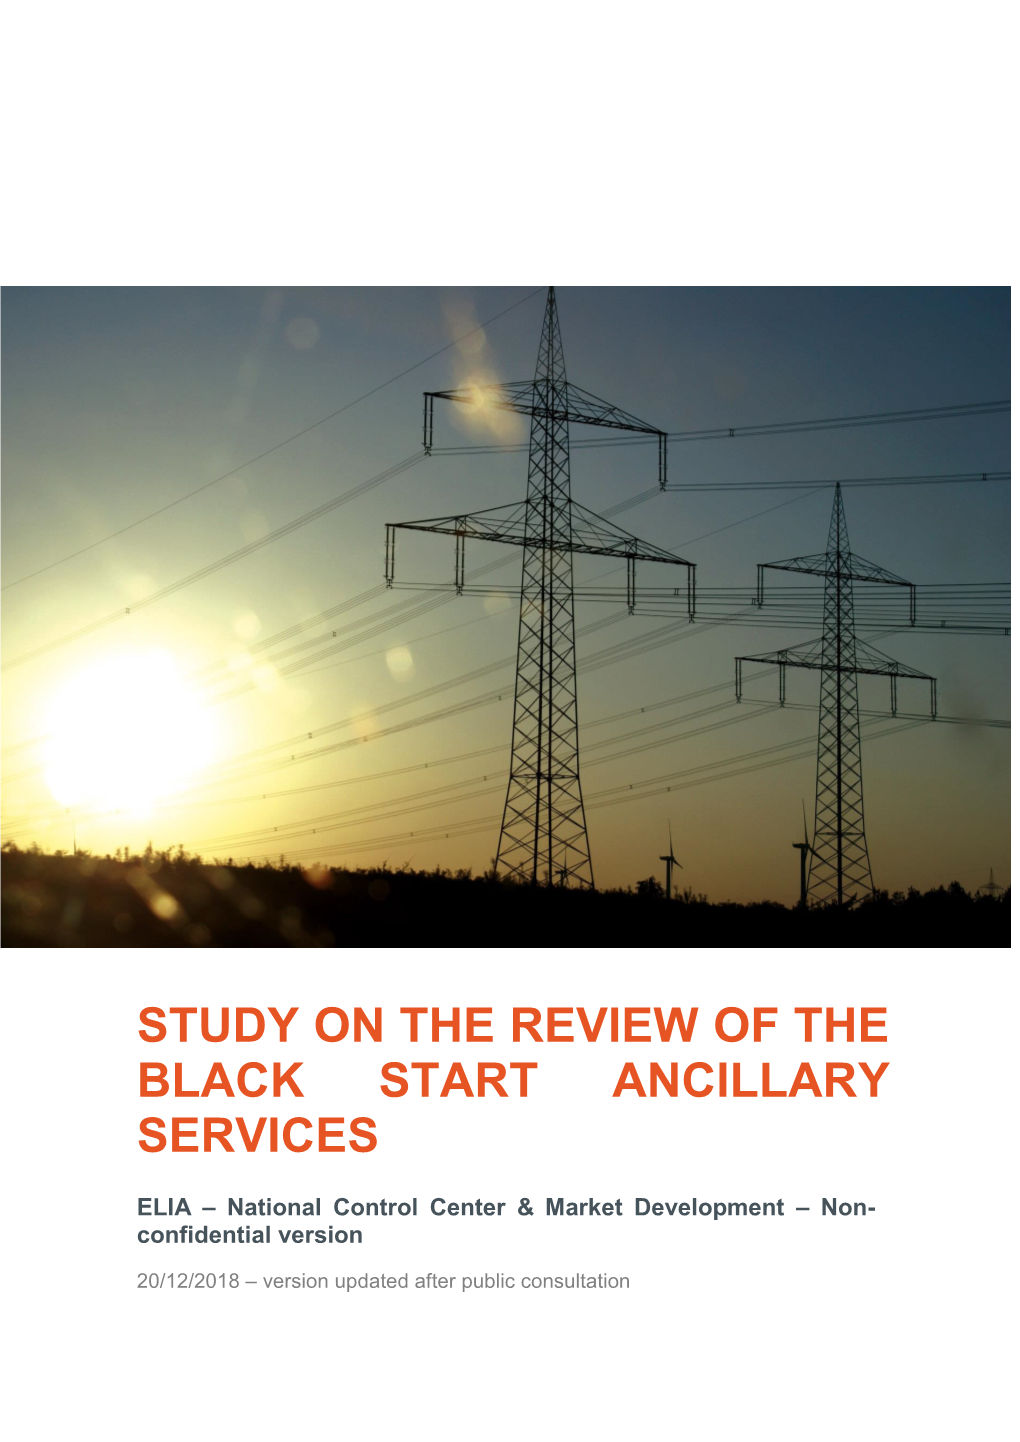 Study on the Review of the Black Start Ancillary Services